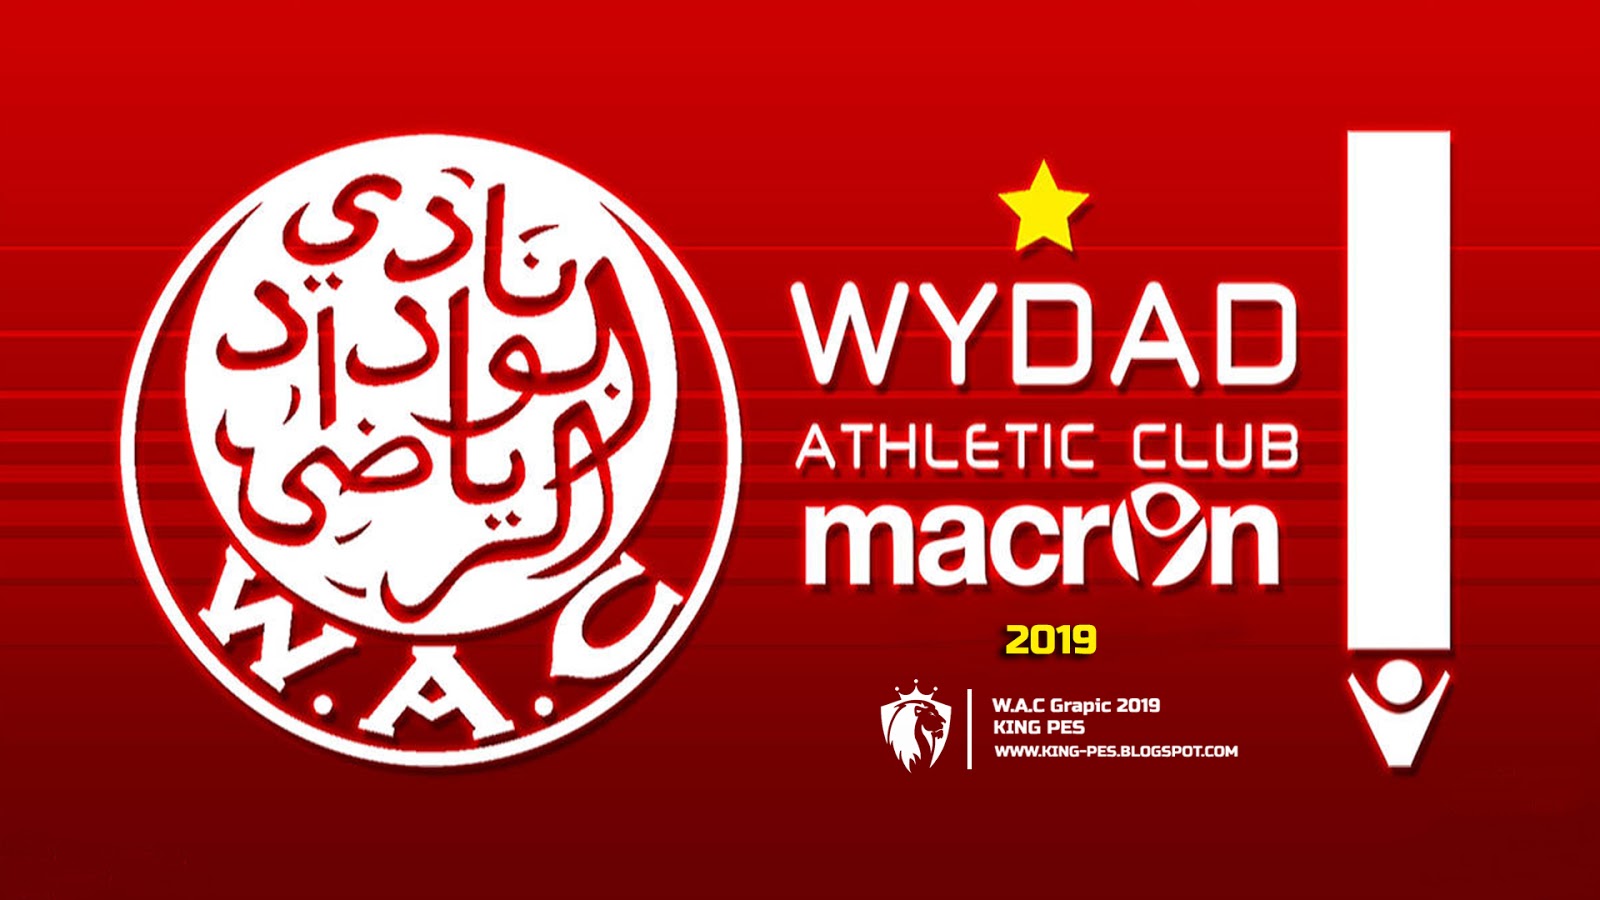 Free download PES 2017 Wydad Graphic